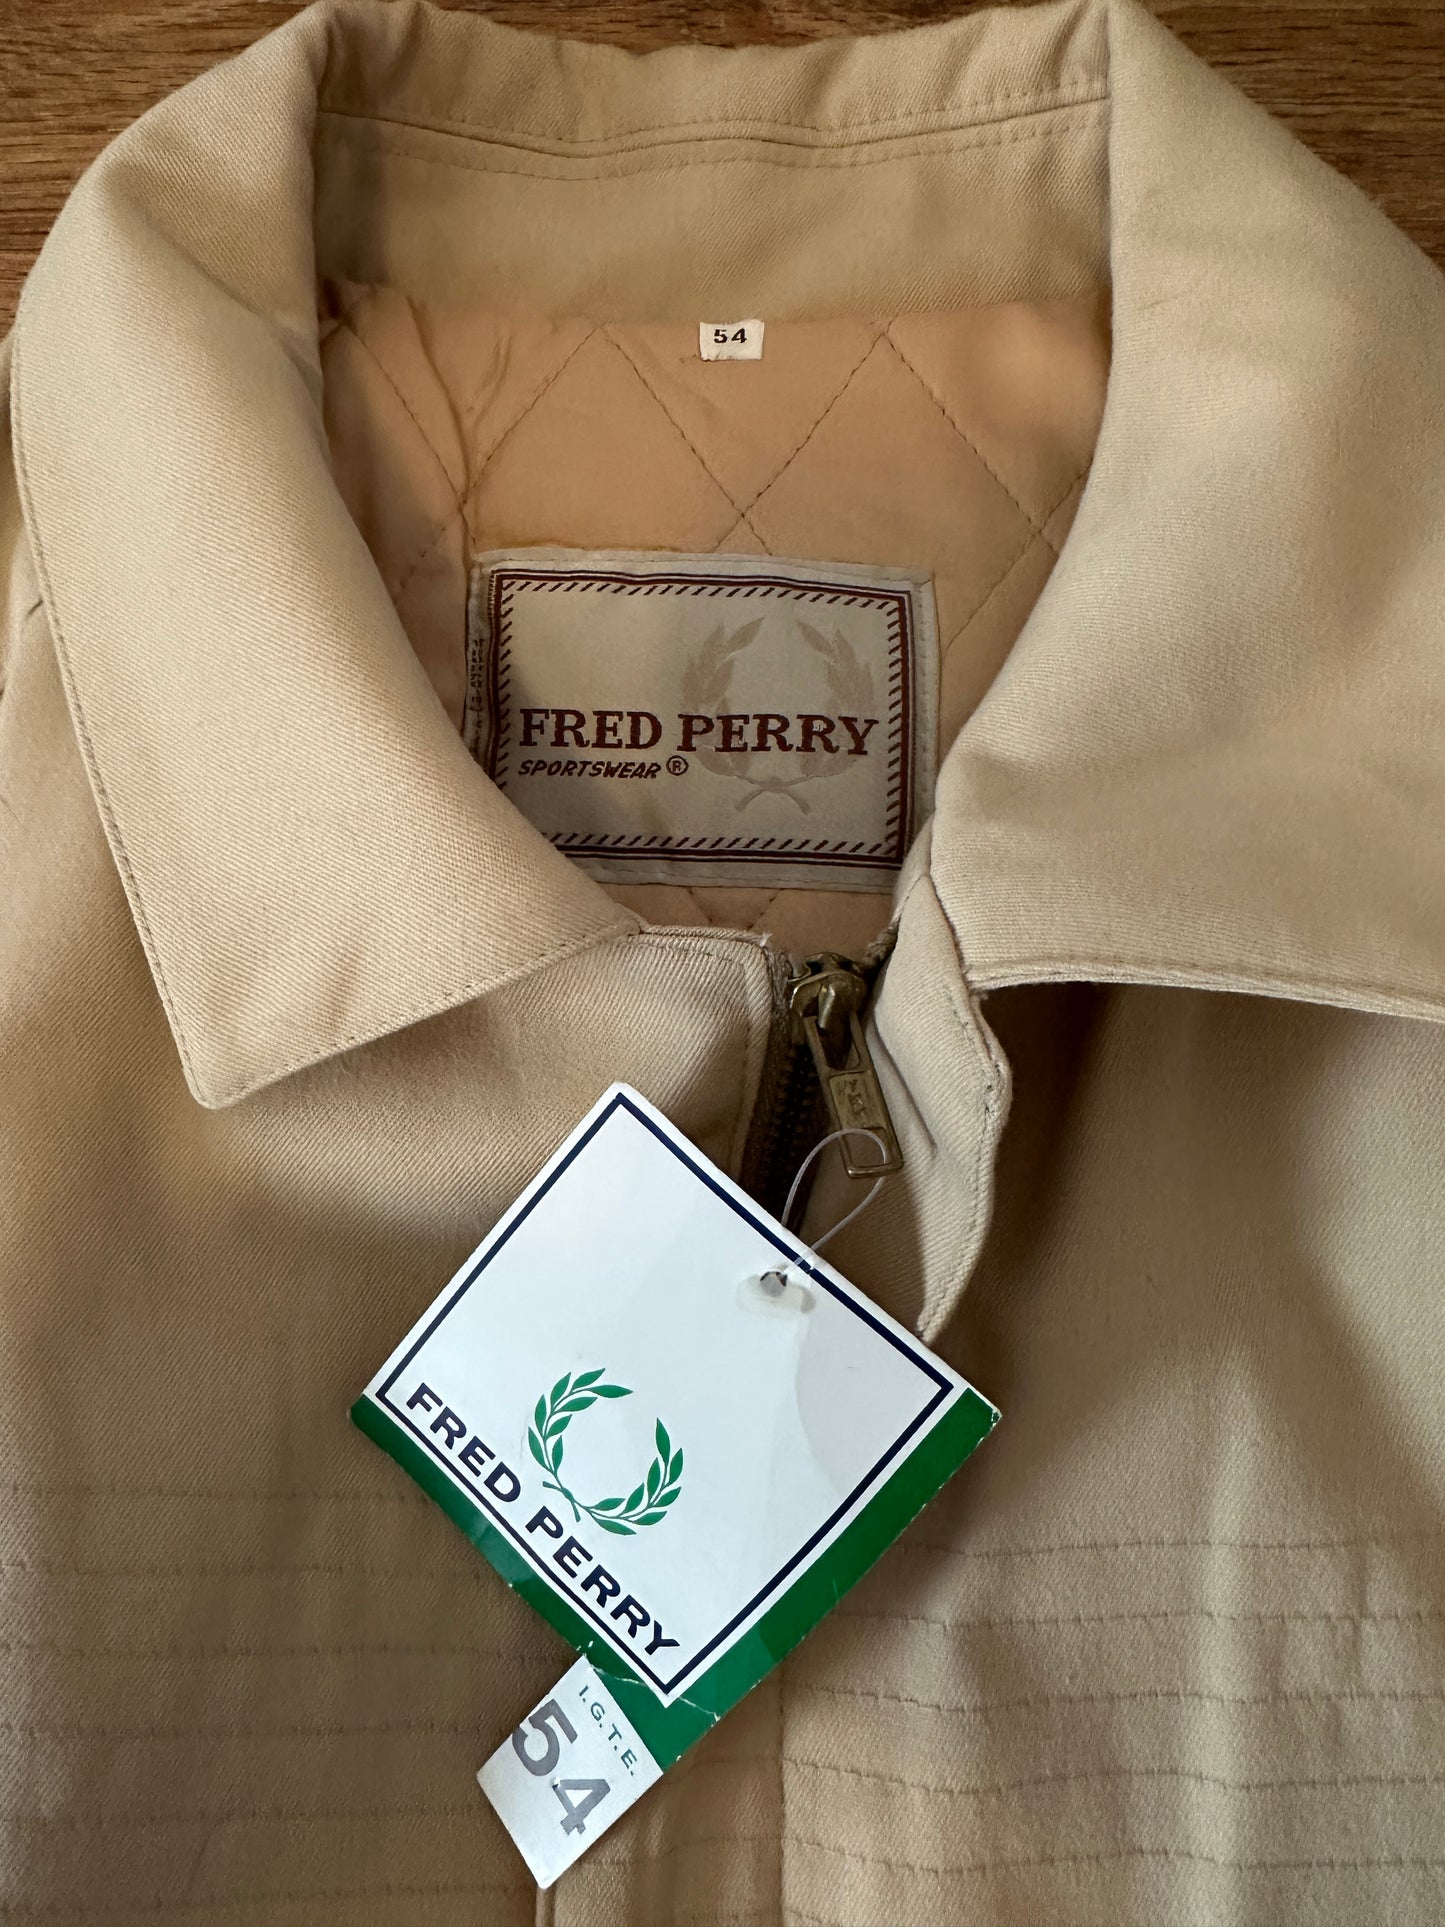 Fred Perry Vintage 80s Anorak Brown-beige - Deadstock - 56 / XL - Made in Spain